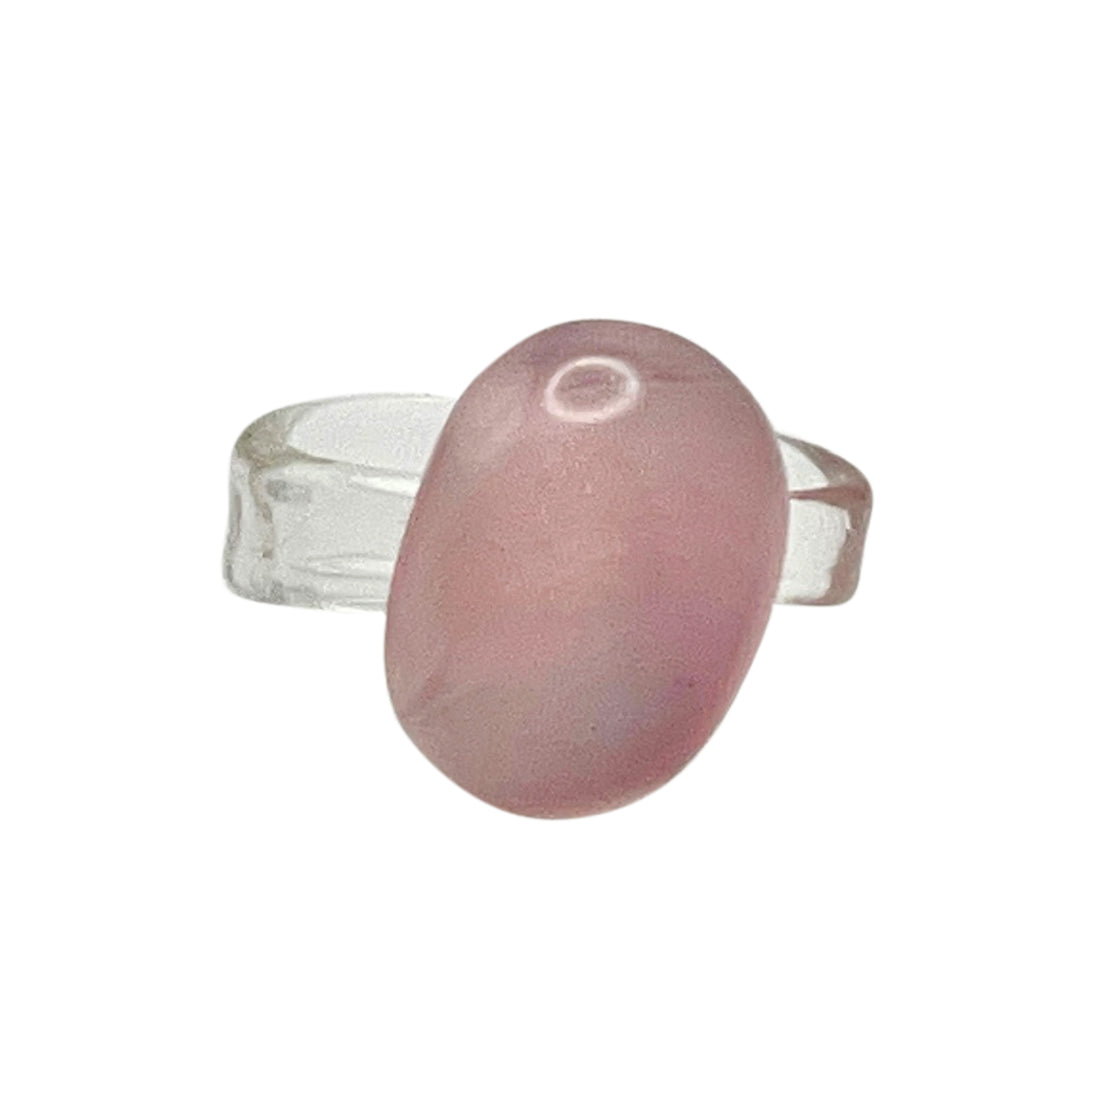 Pinky Jelly Bean Ring